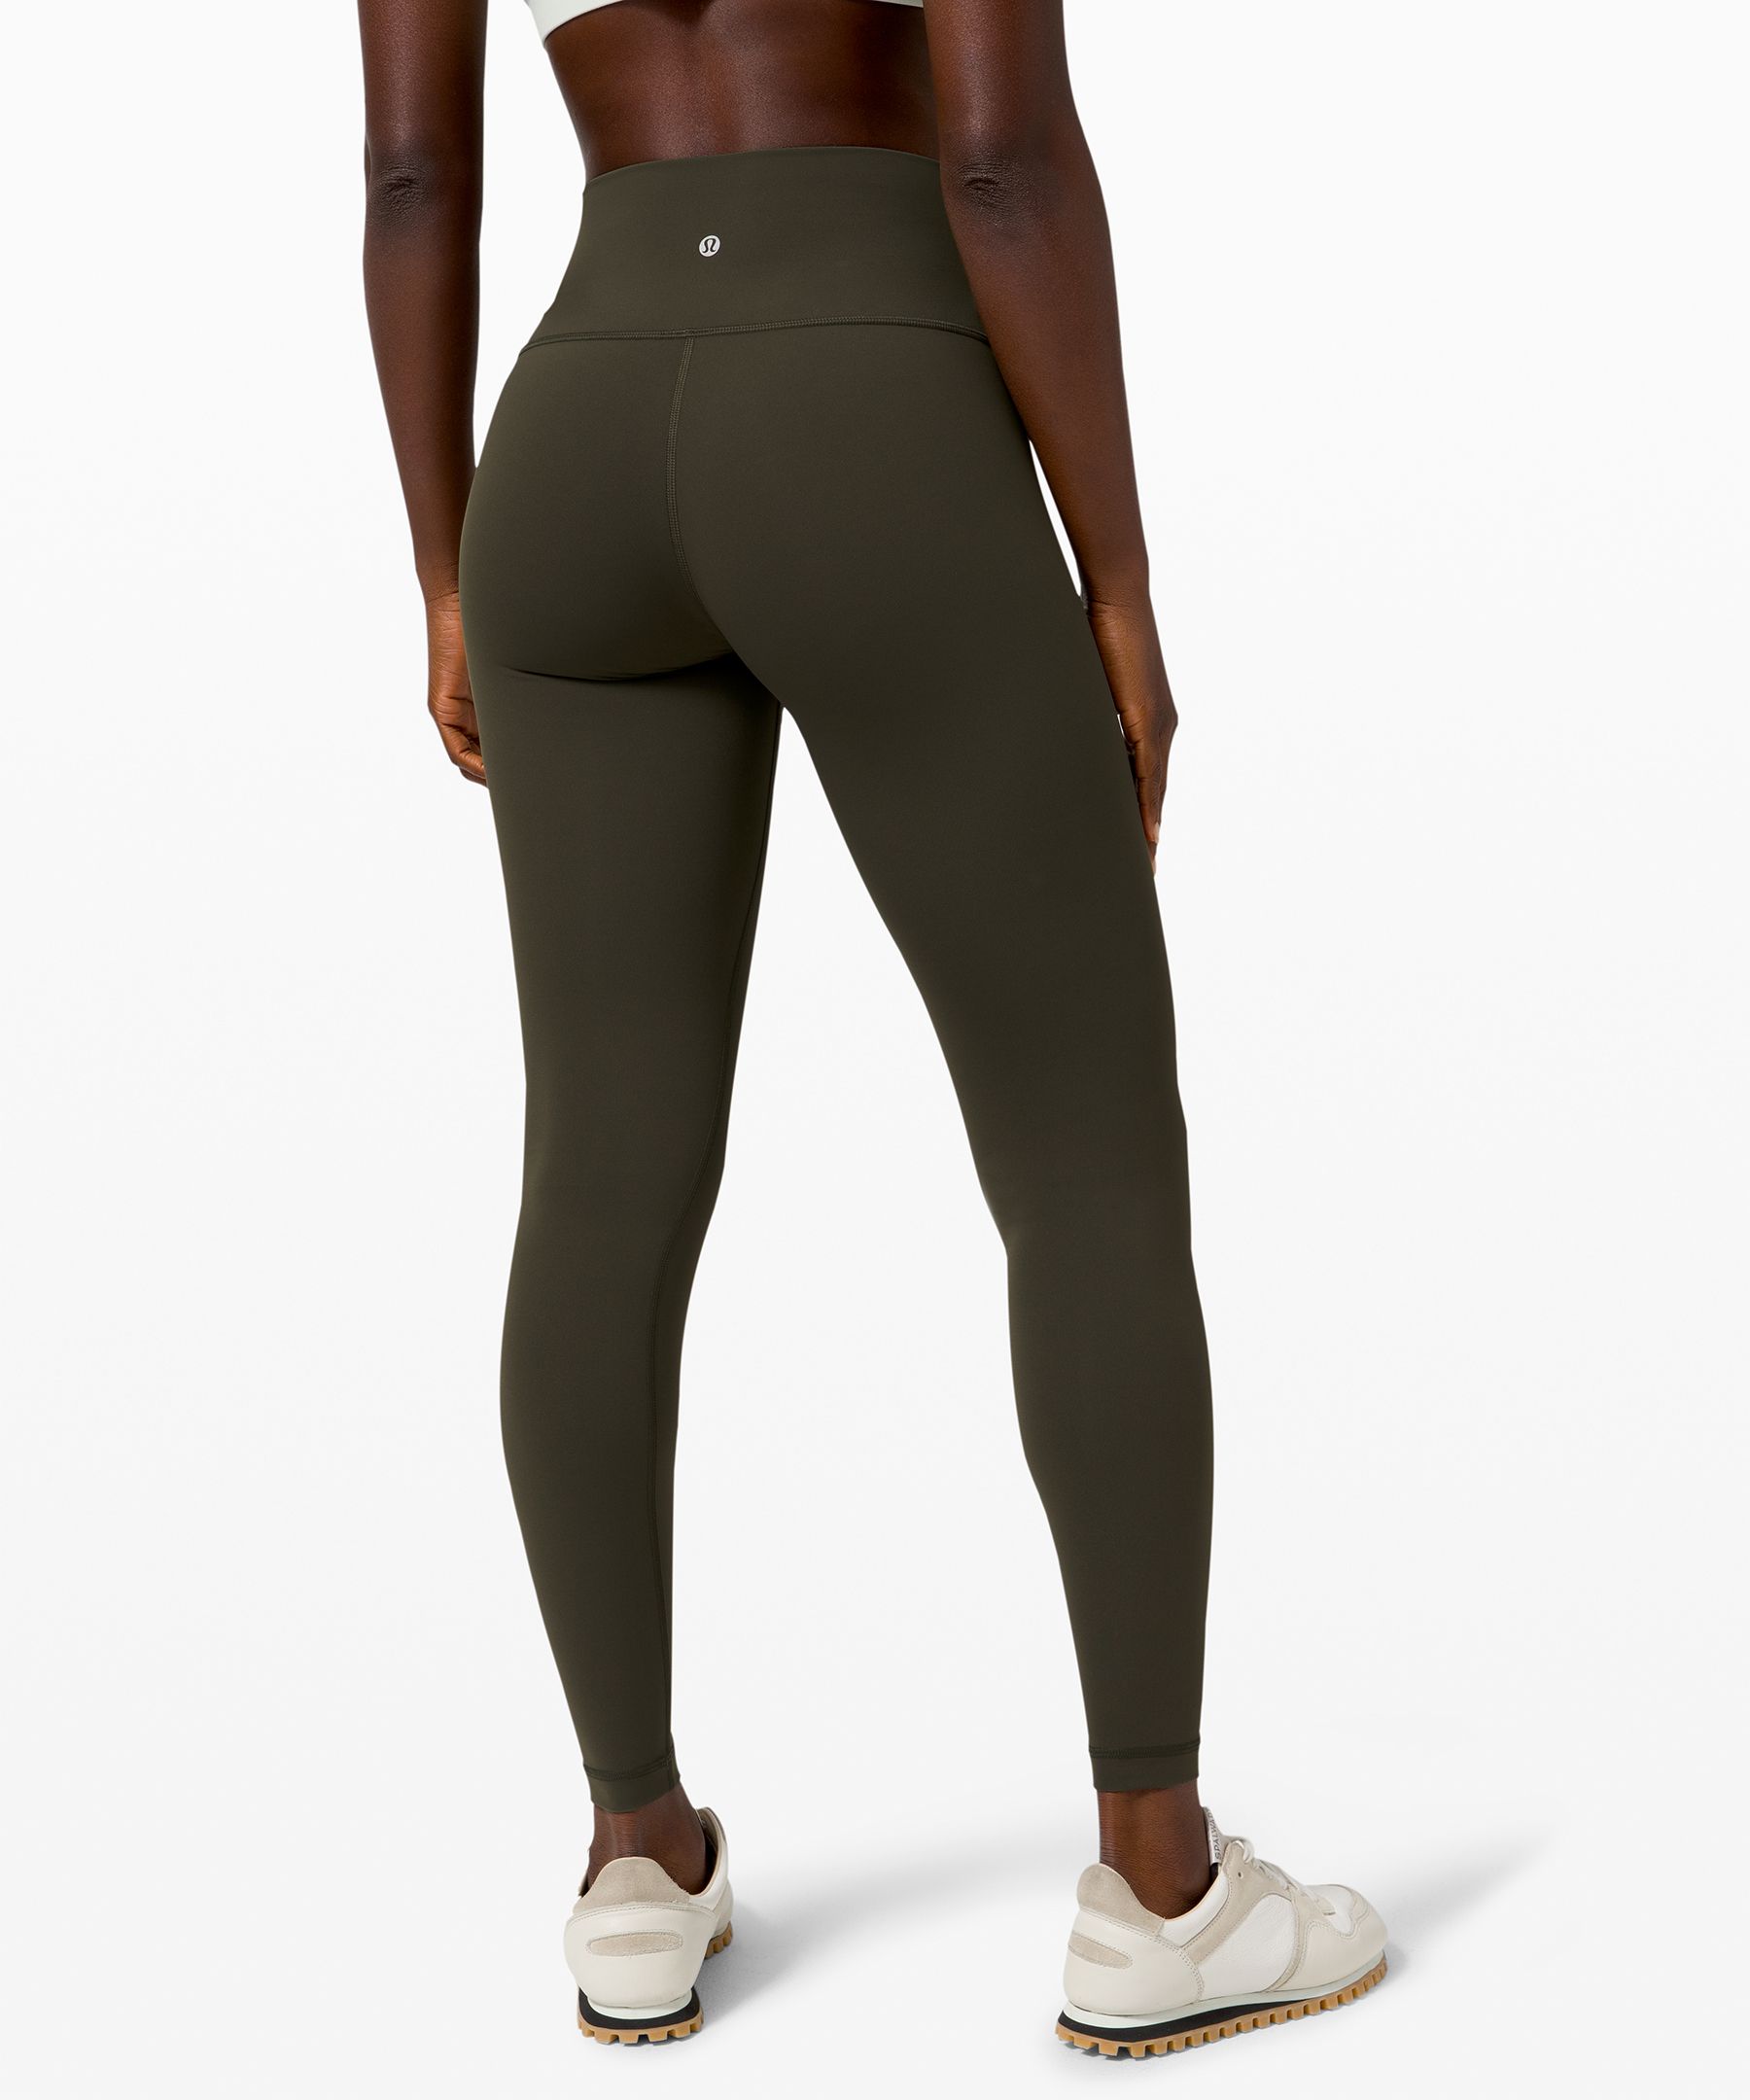 Wunder Under Super High-Rise Tight 28 *Full-On Luxtreme